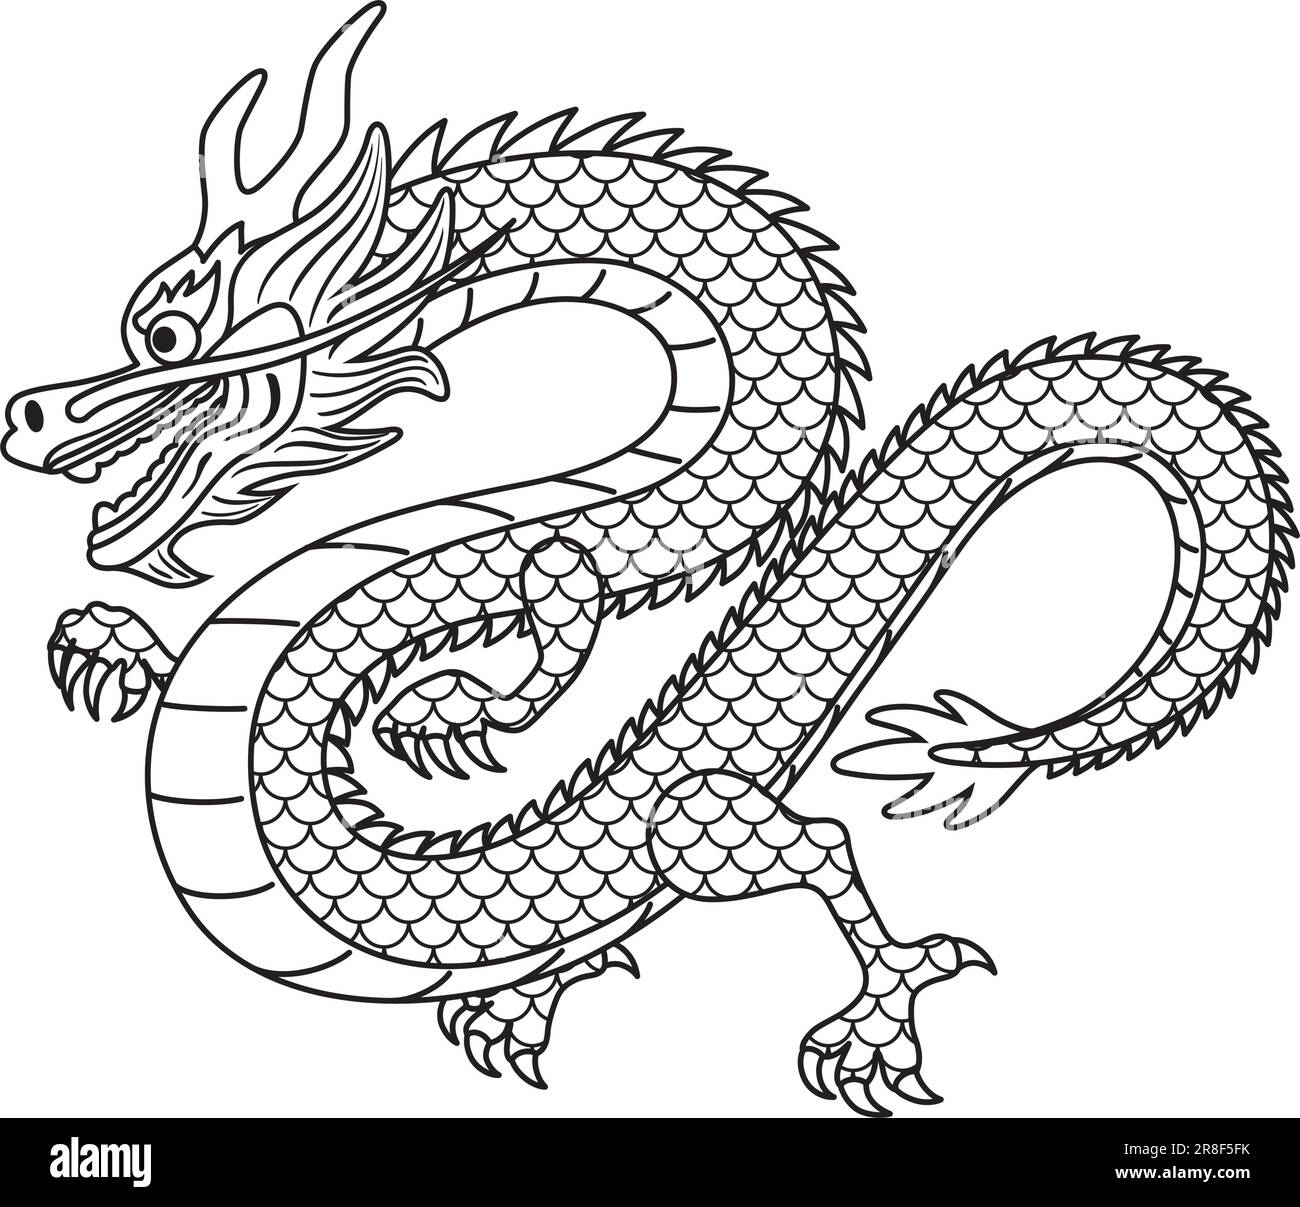 Year Of The Dragon Vector Black And White Zodiac Symbol Illustration Isolated On A White Background. Stock Vector